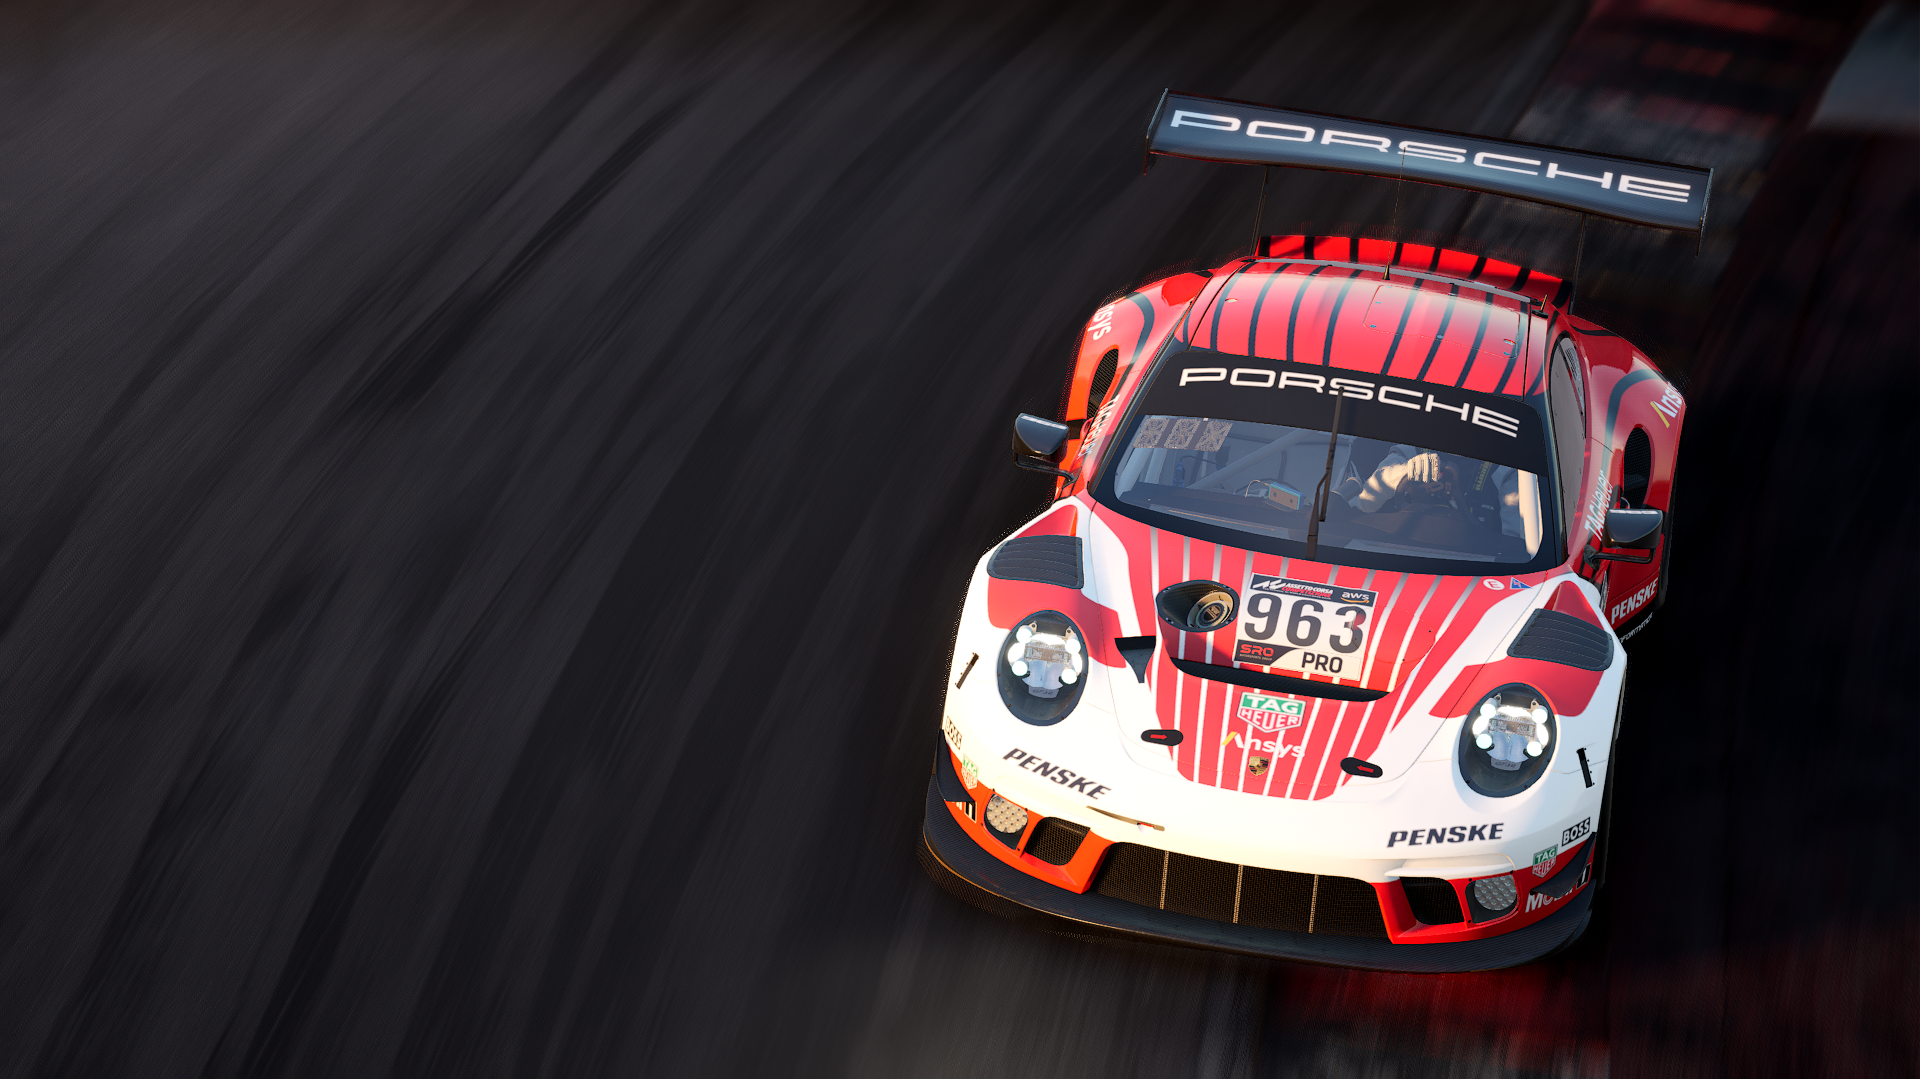 I recreated the Porsche 963 LMDh livery for ACC what do you think